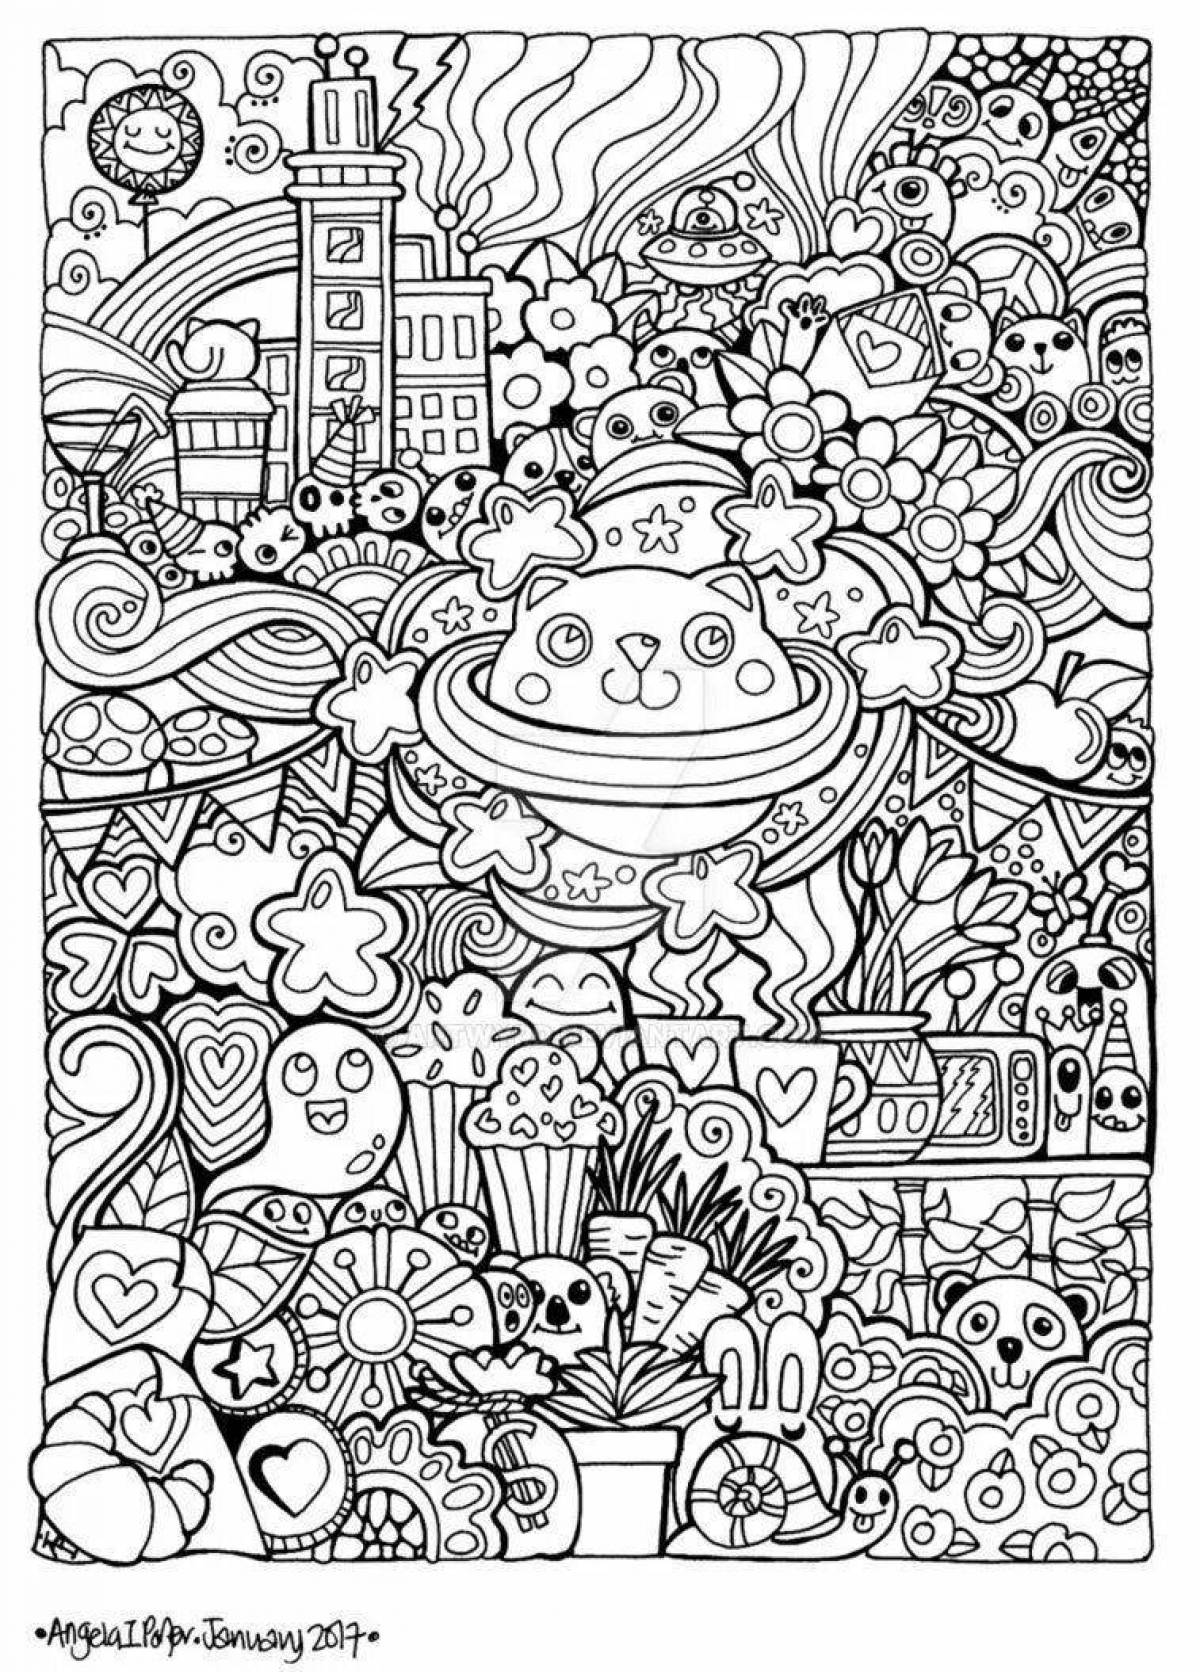 Refreshing anti-stress little coloring book